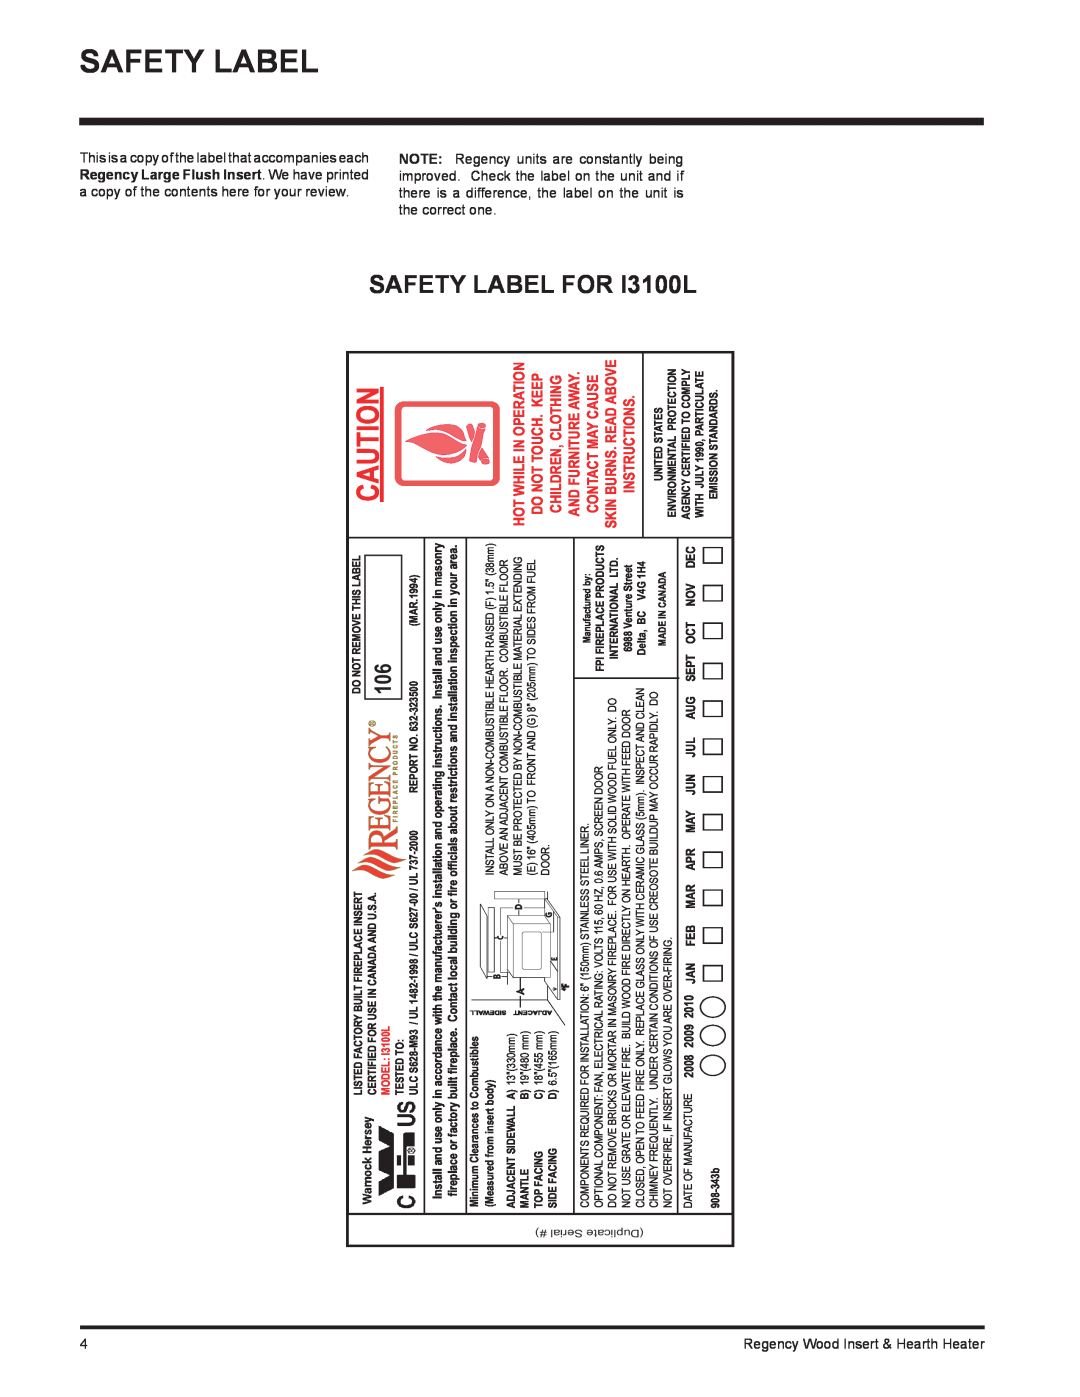 Regency H2100 Safety Label, Hot While In Operation, Contact May Cause Skin Burns. Read Above, Instructions, Serial # 